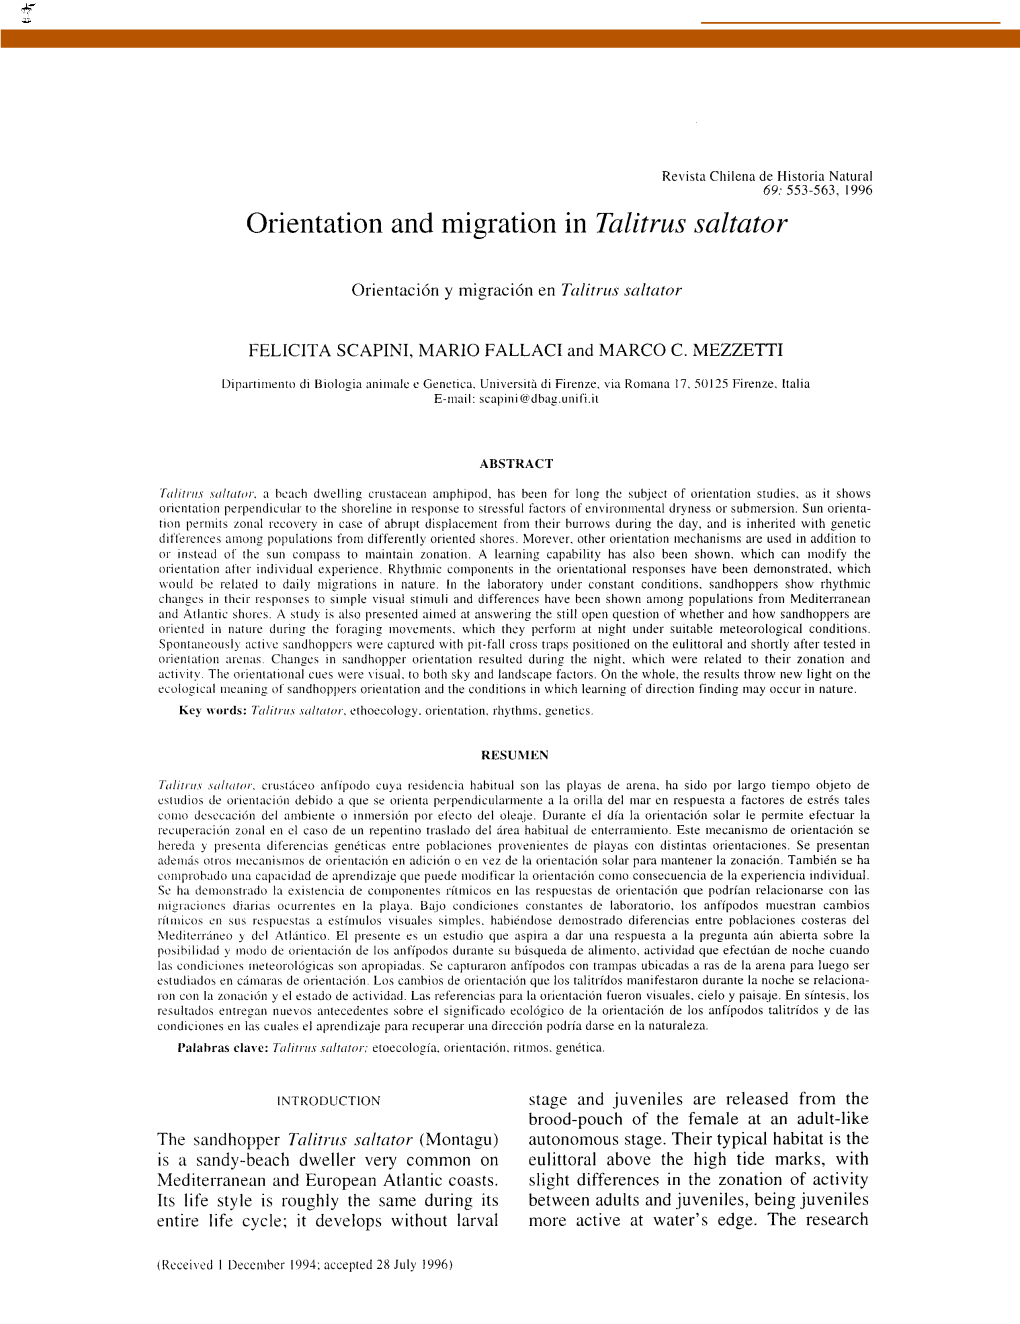 Orientation and Migration in Talitrus Saltator